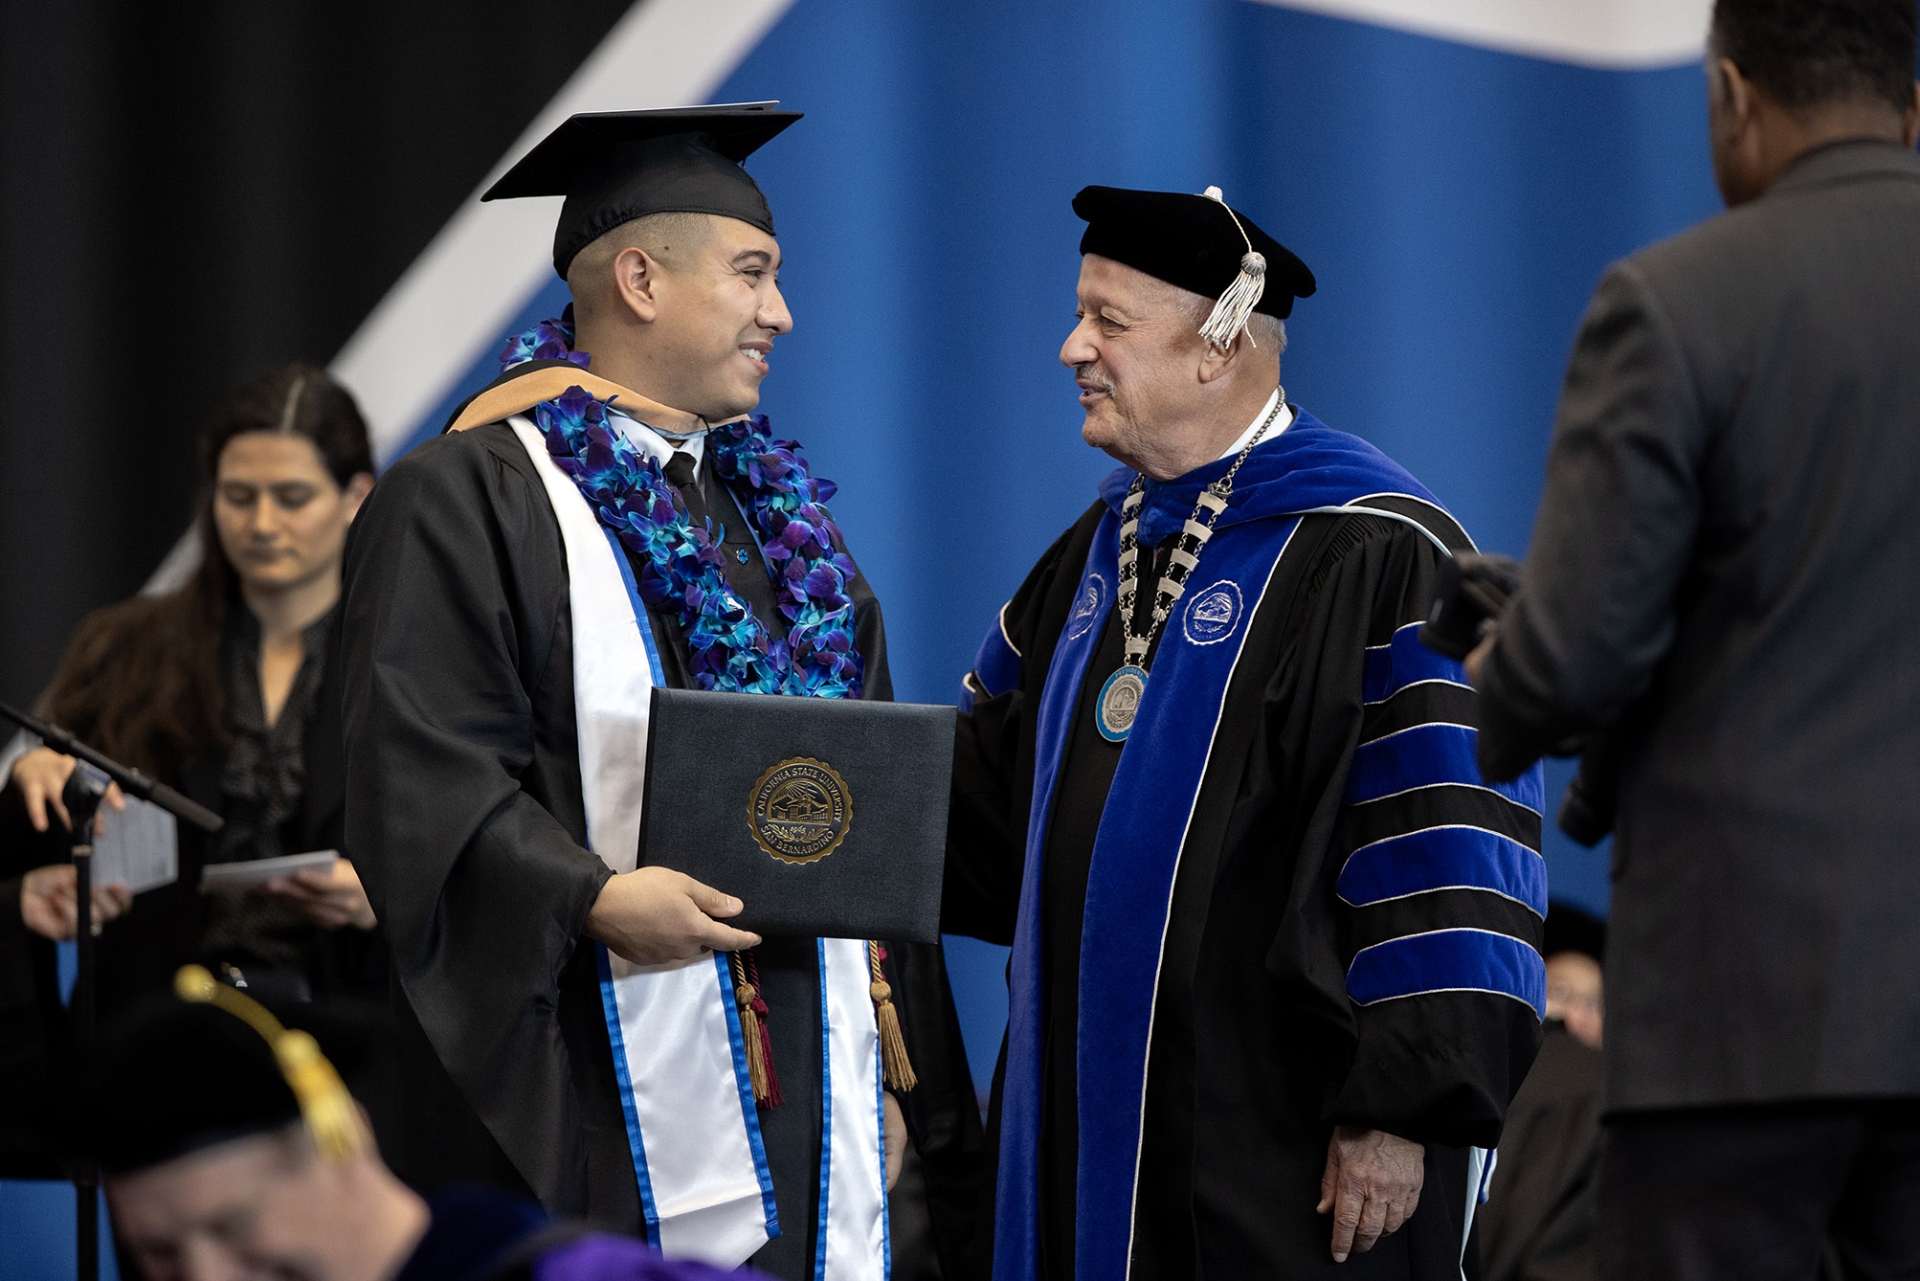 CSUSB President Tomás D. Morales congratulates a graduate of Jack H. Brown College of Business and Public Administration.